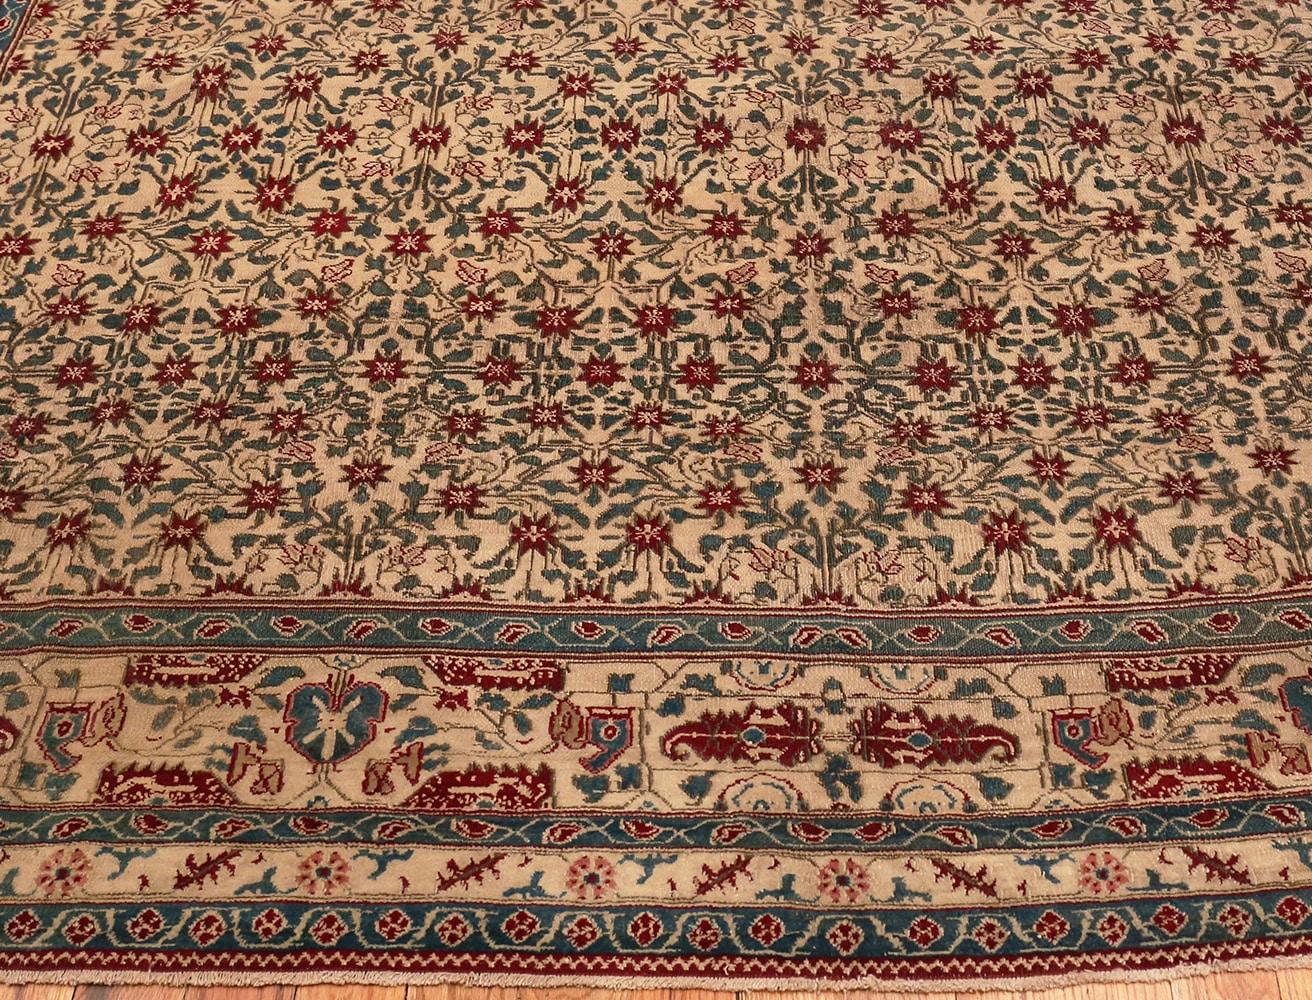 8 by 10 rug size